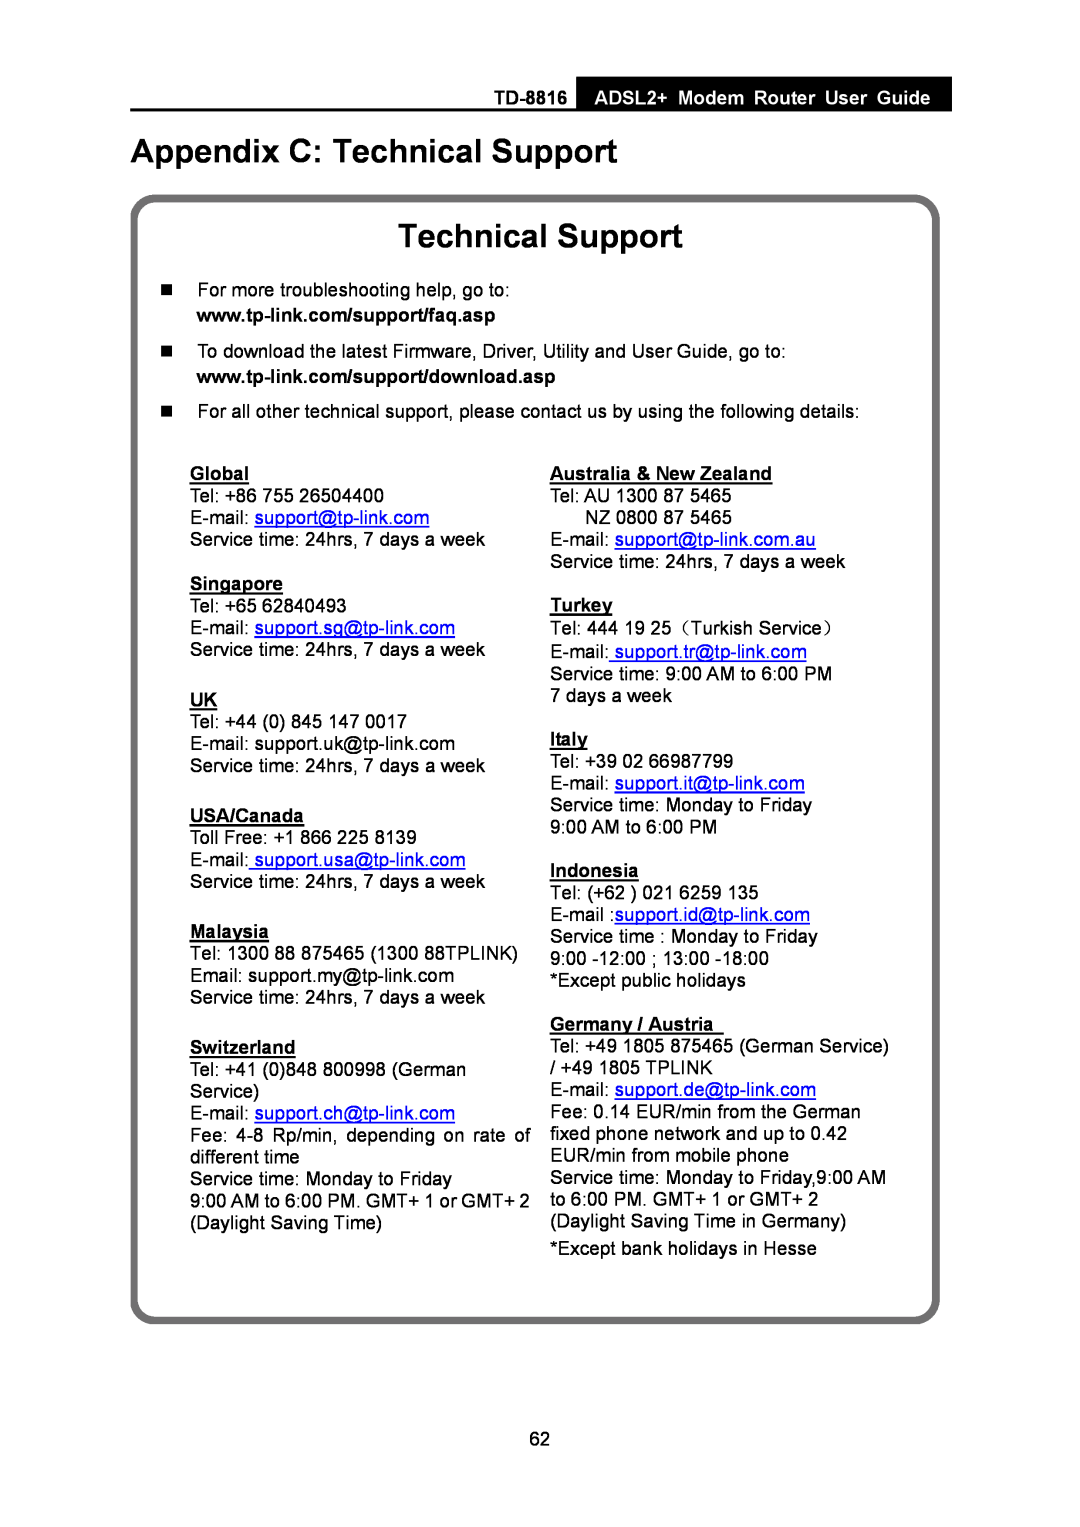 TP-Link TD-8816 Appendix C Technical Support Technical Support, ADSL2+ Modem Router User Guide, Global, Singapore, Turkey 